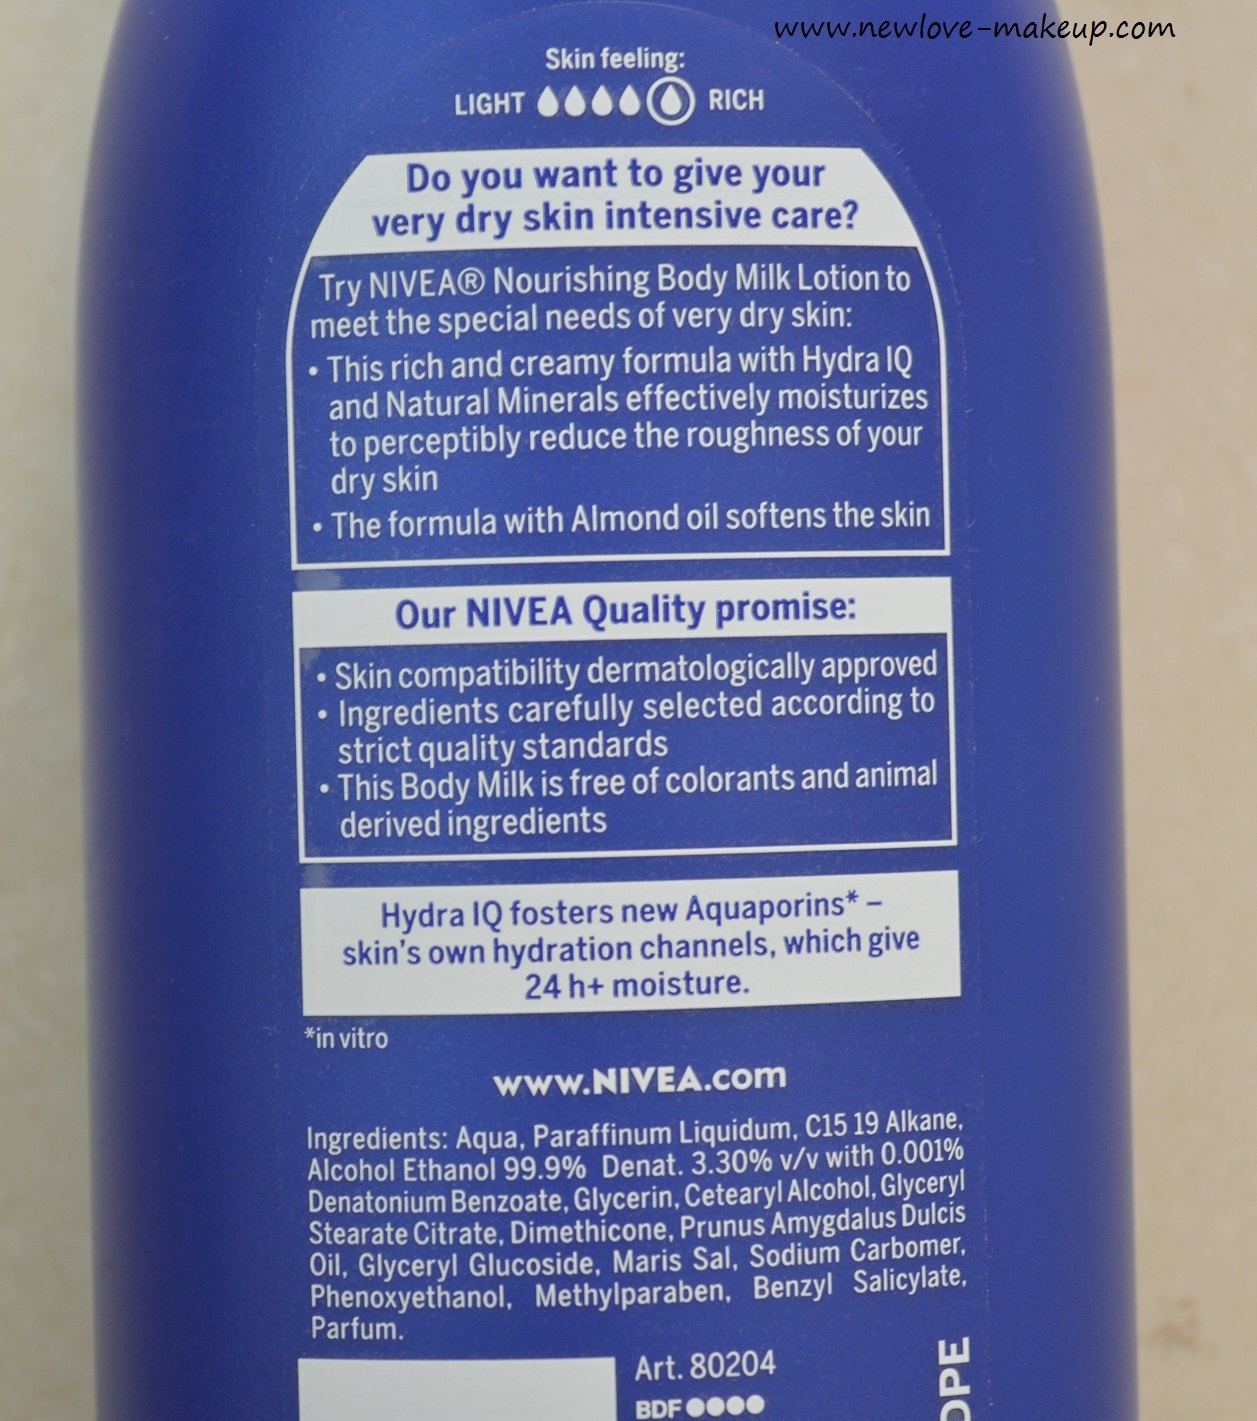 binde Indien undskylde Nivea Body Lotions Review - New Love - Makeup